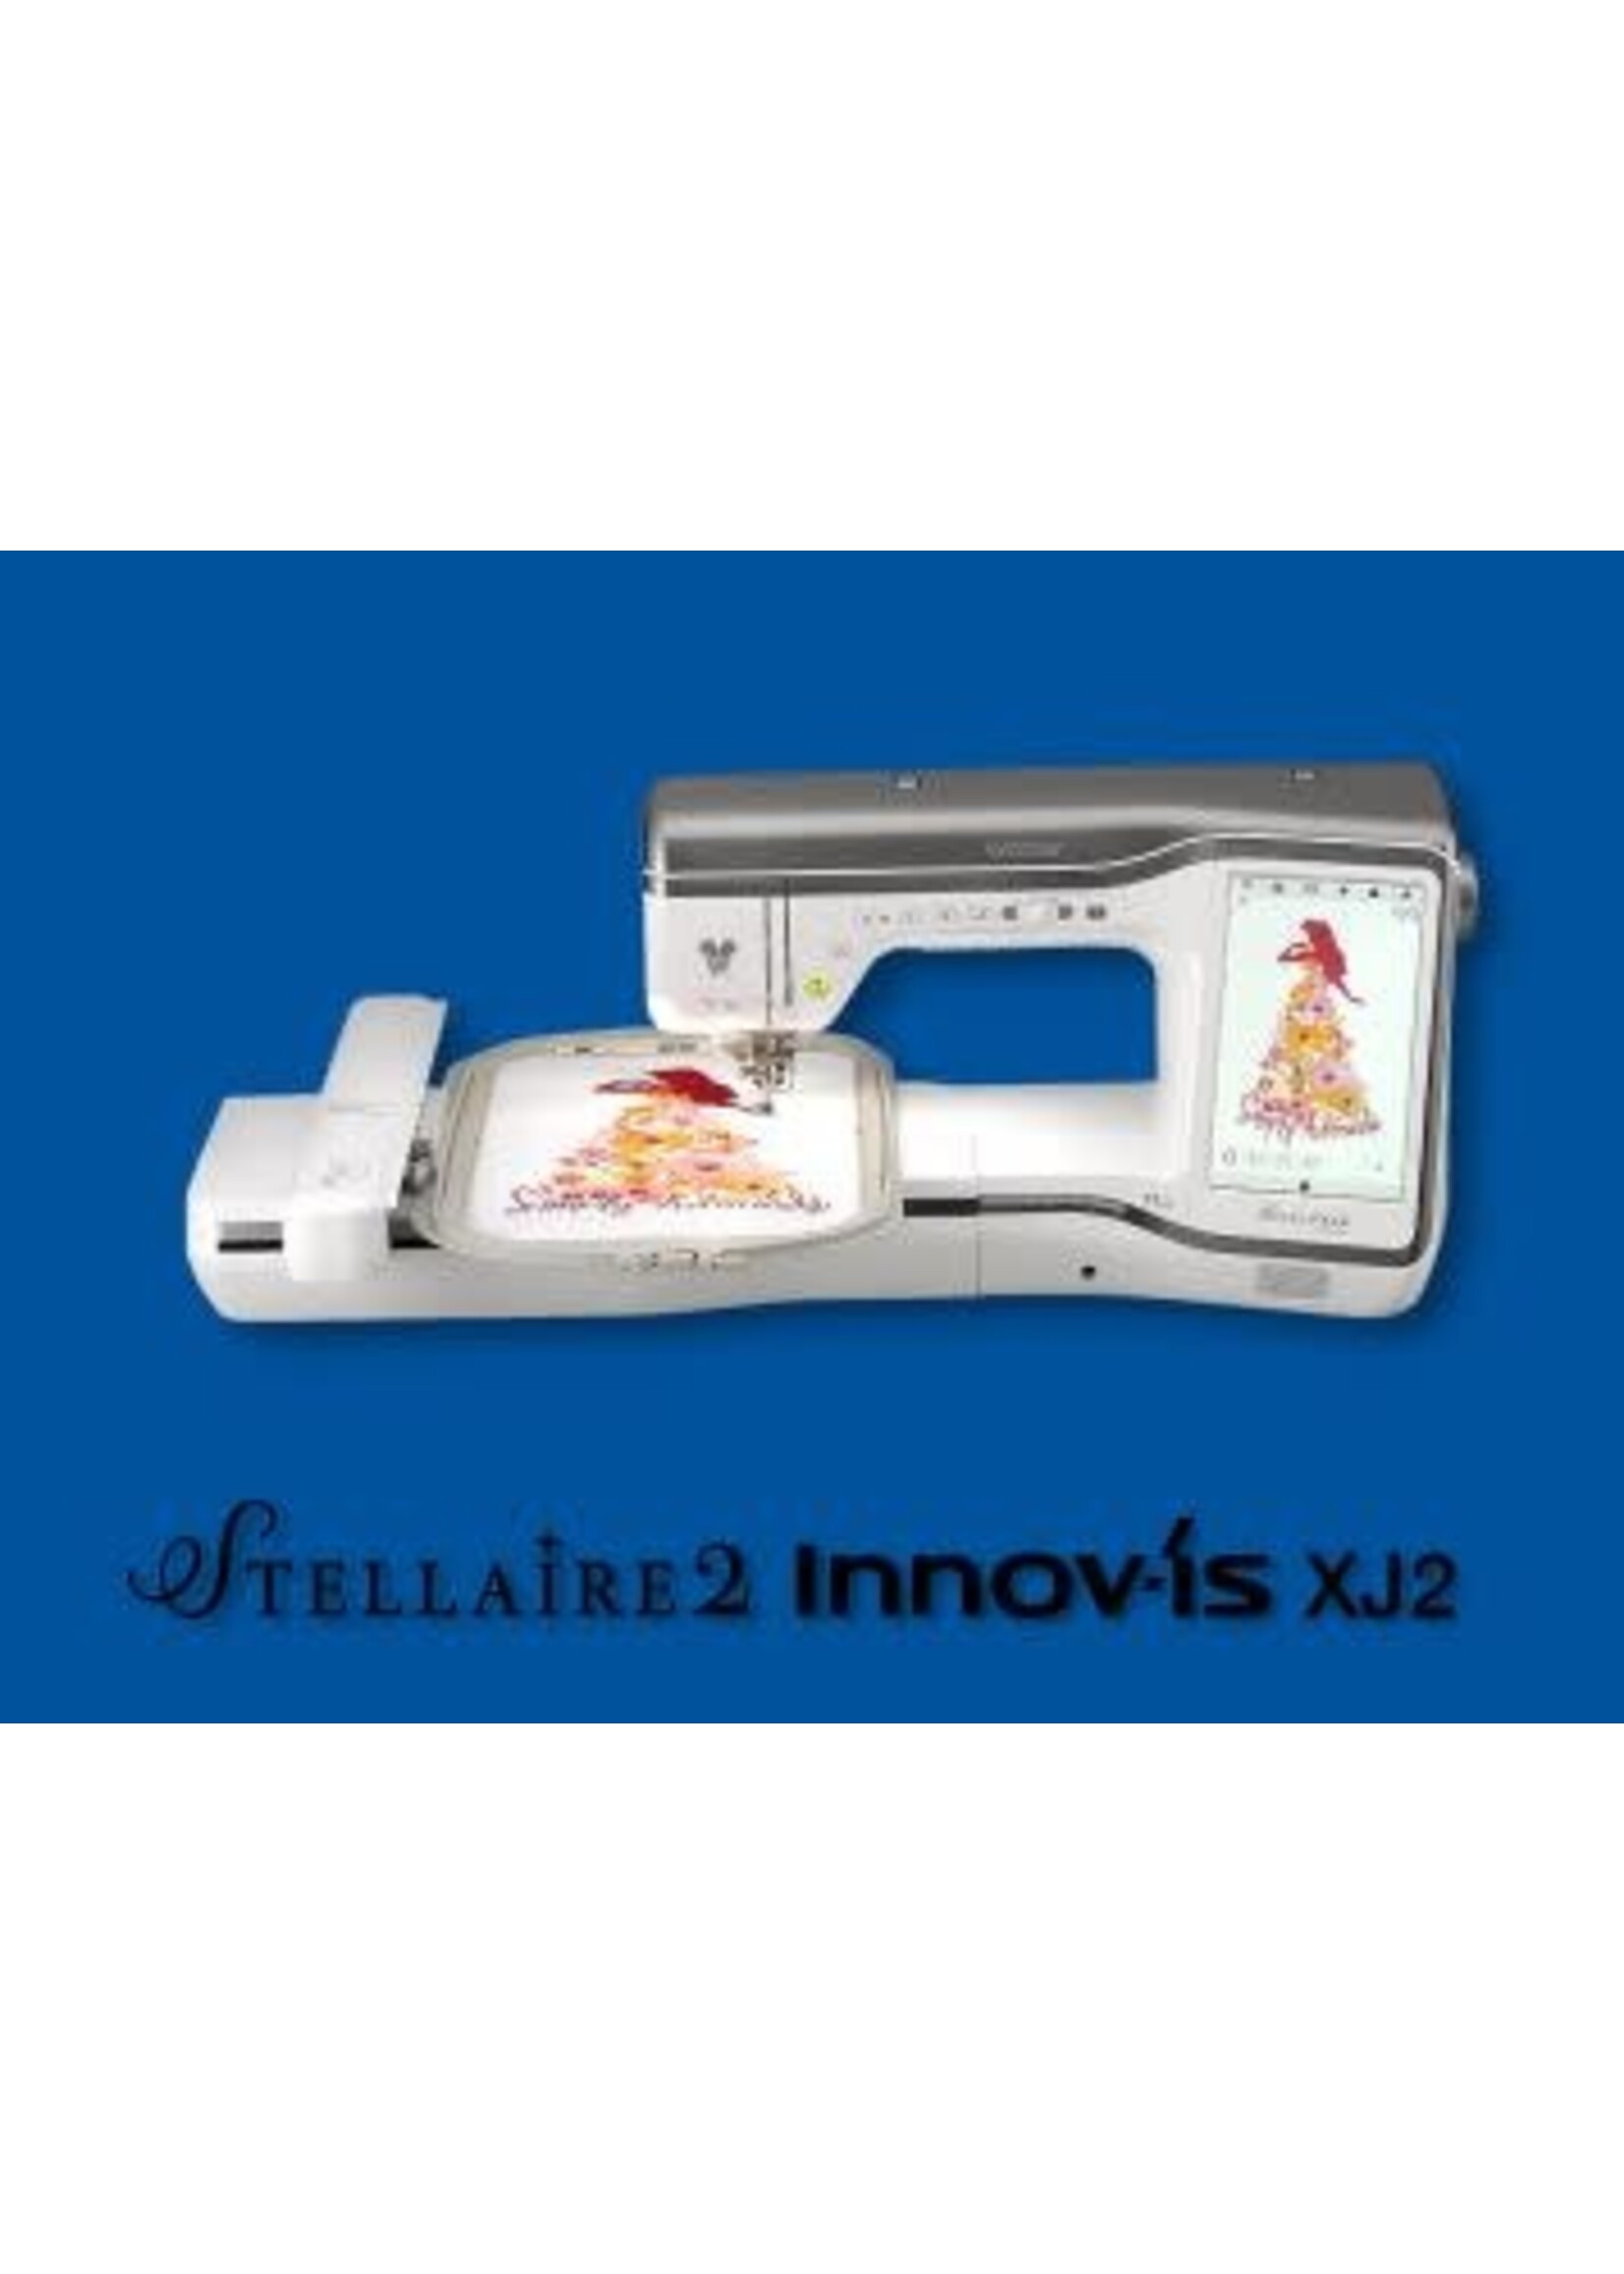 Brother Brother Stellaire 2 -  Innov-is XJ2 Sewing and Embroidery